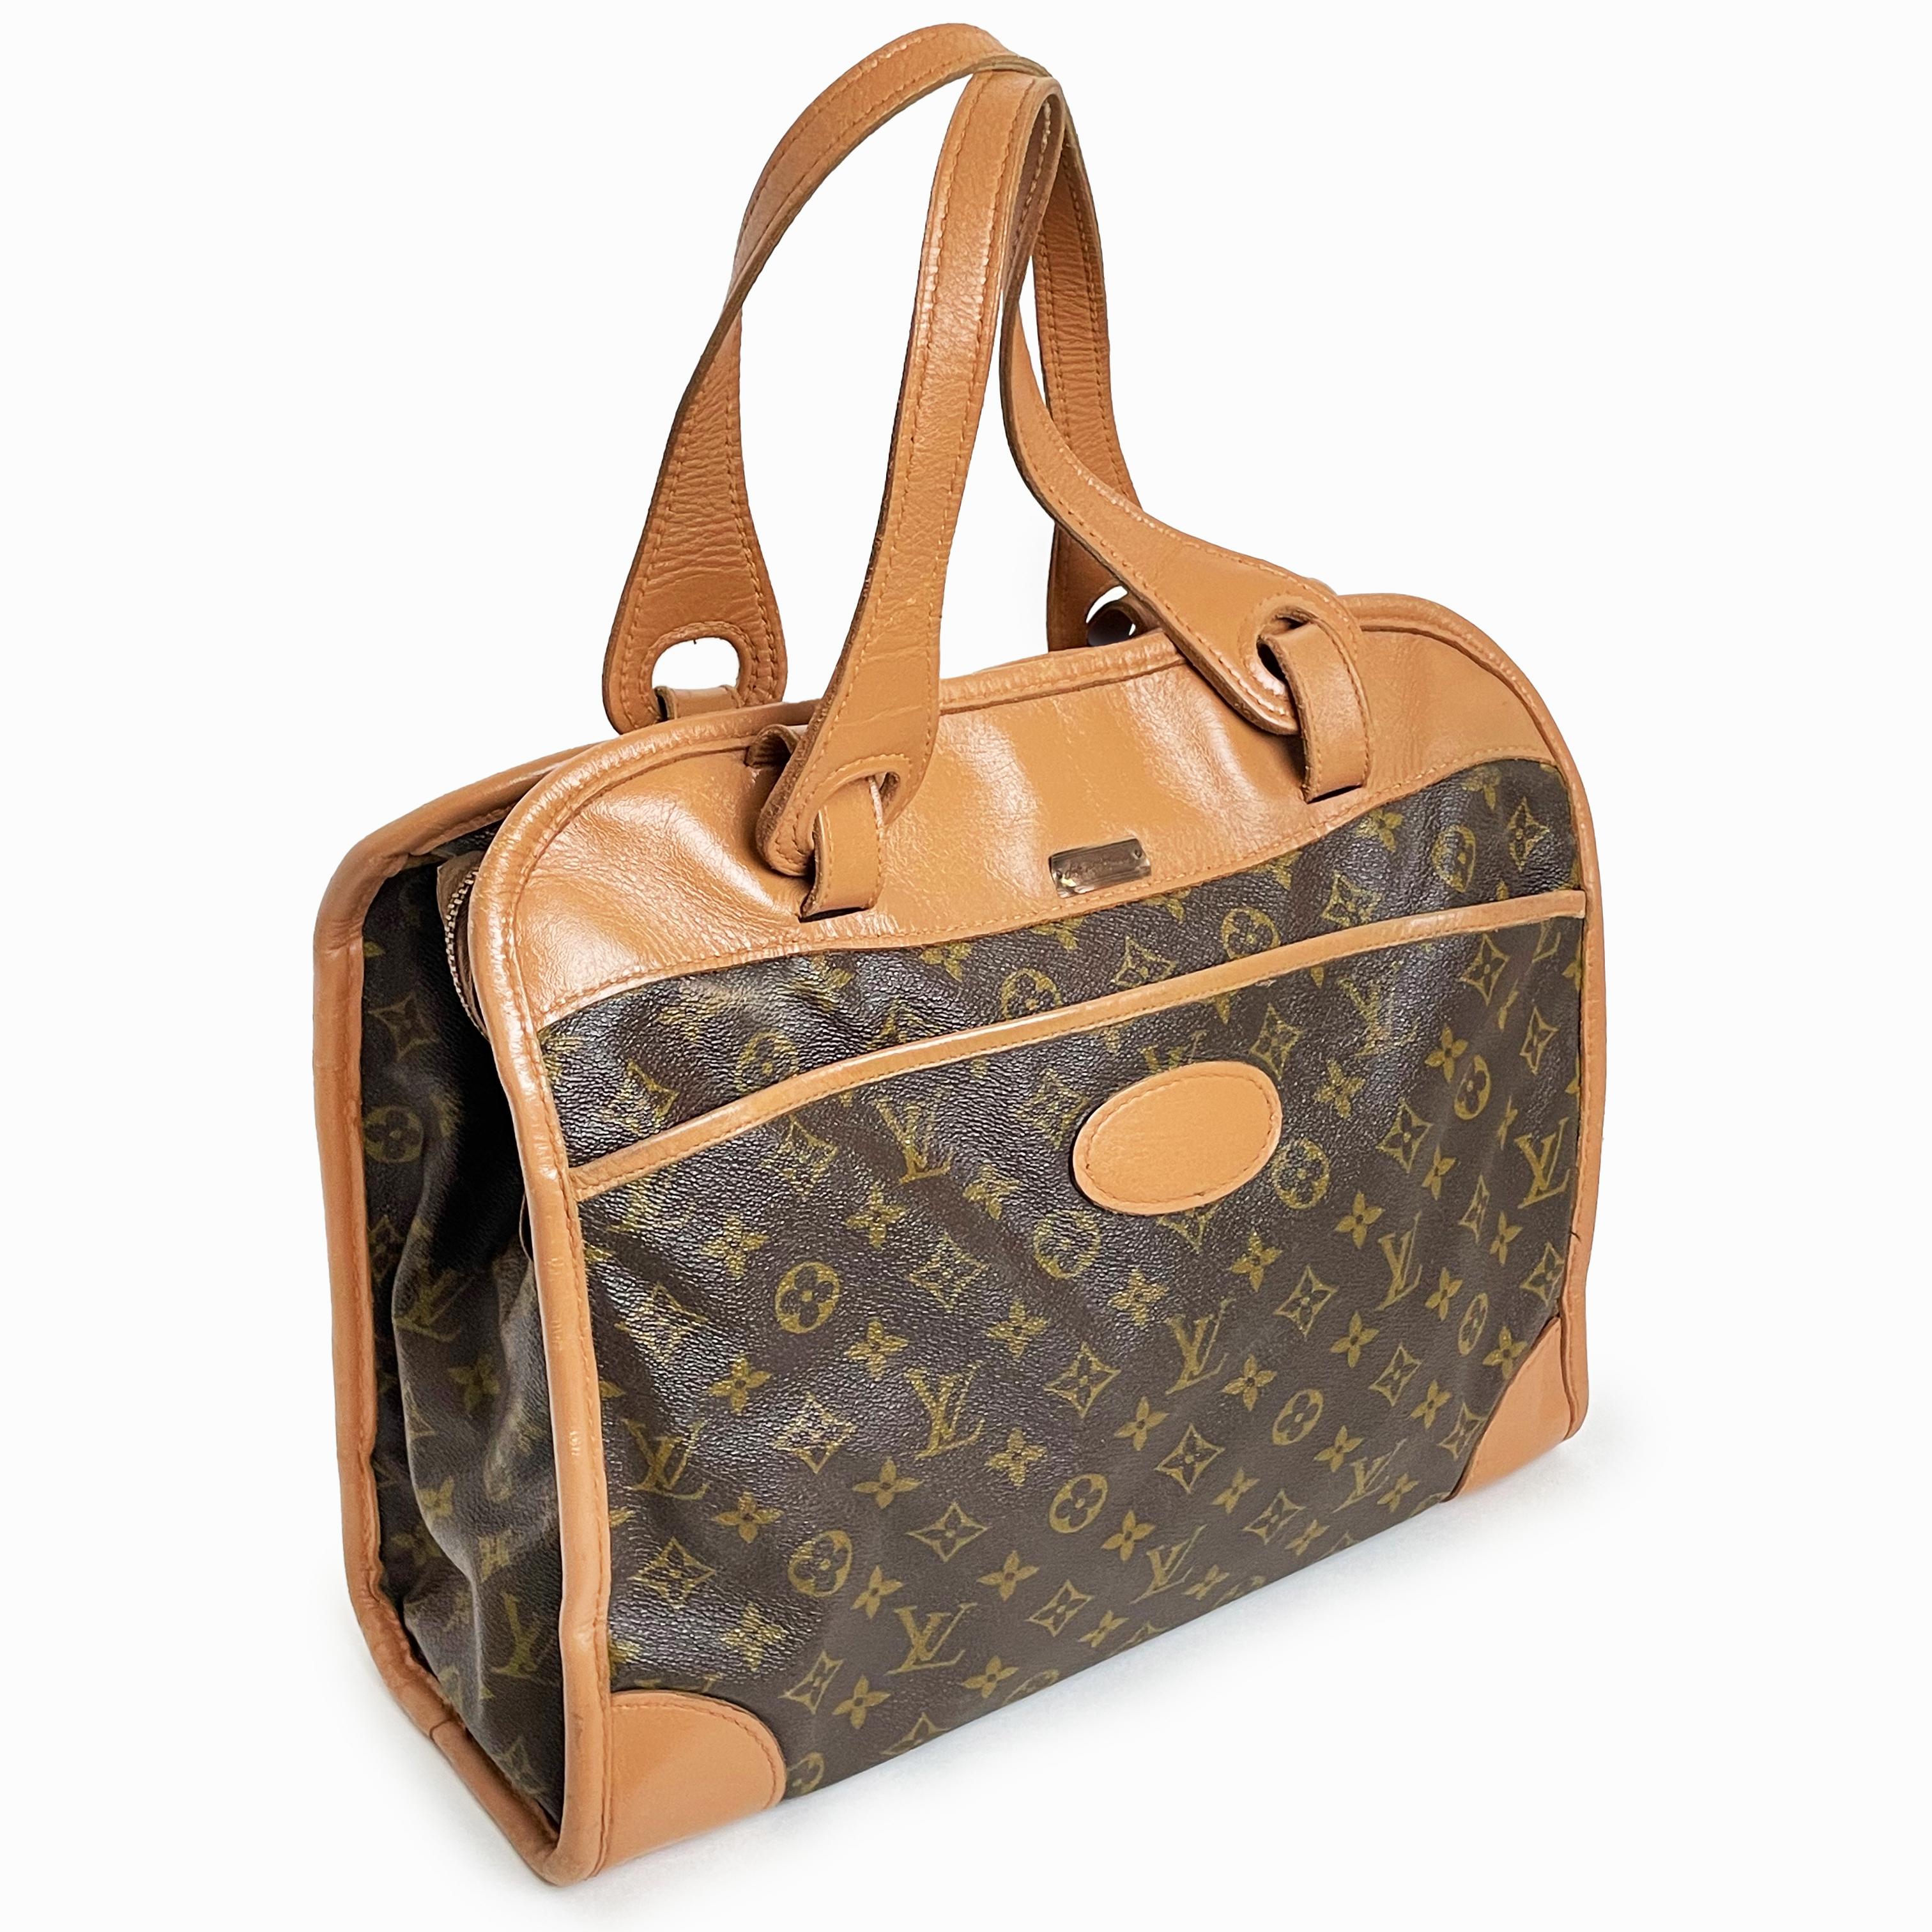 Travel in style with this authentic vintage 70s Louis Vuitton x French Luggage Co tote bag carry-on, made for Saks Fifth Avenue. It features Vuitton's classic monogram canvas and coated leather trim exterior with 1 zip exterior pocket and 1 open